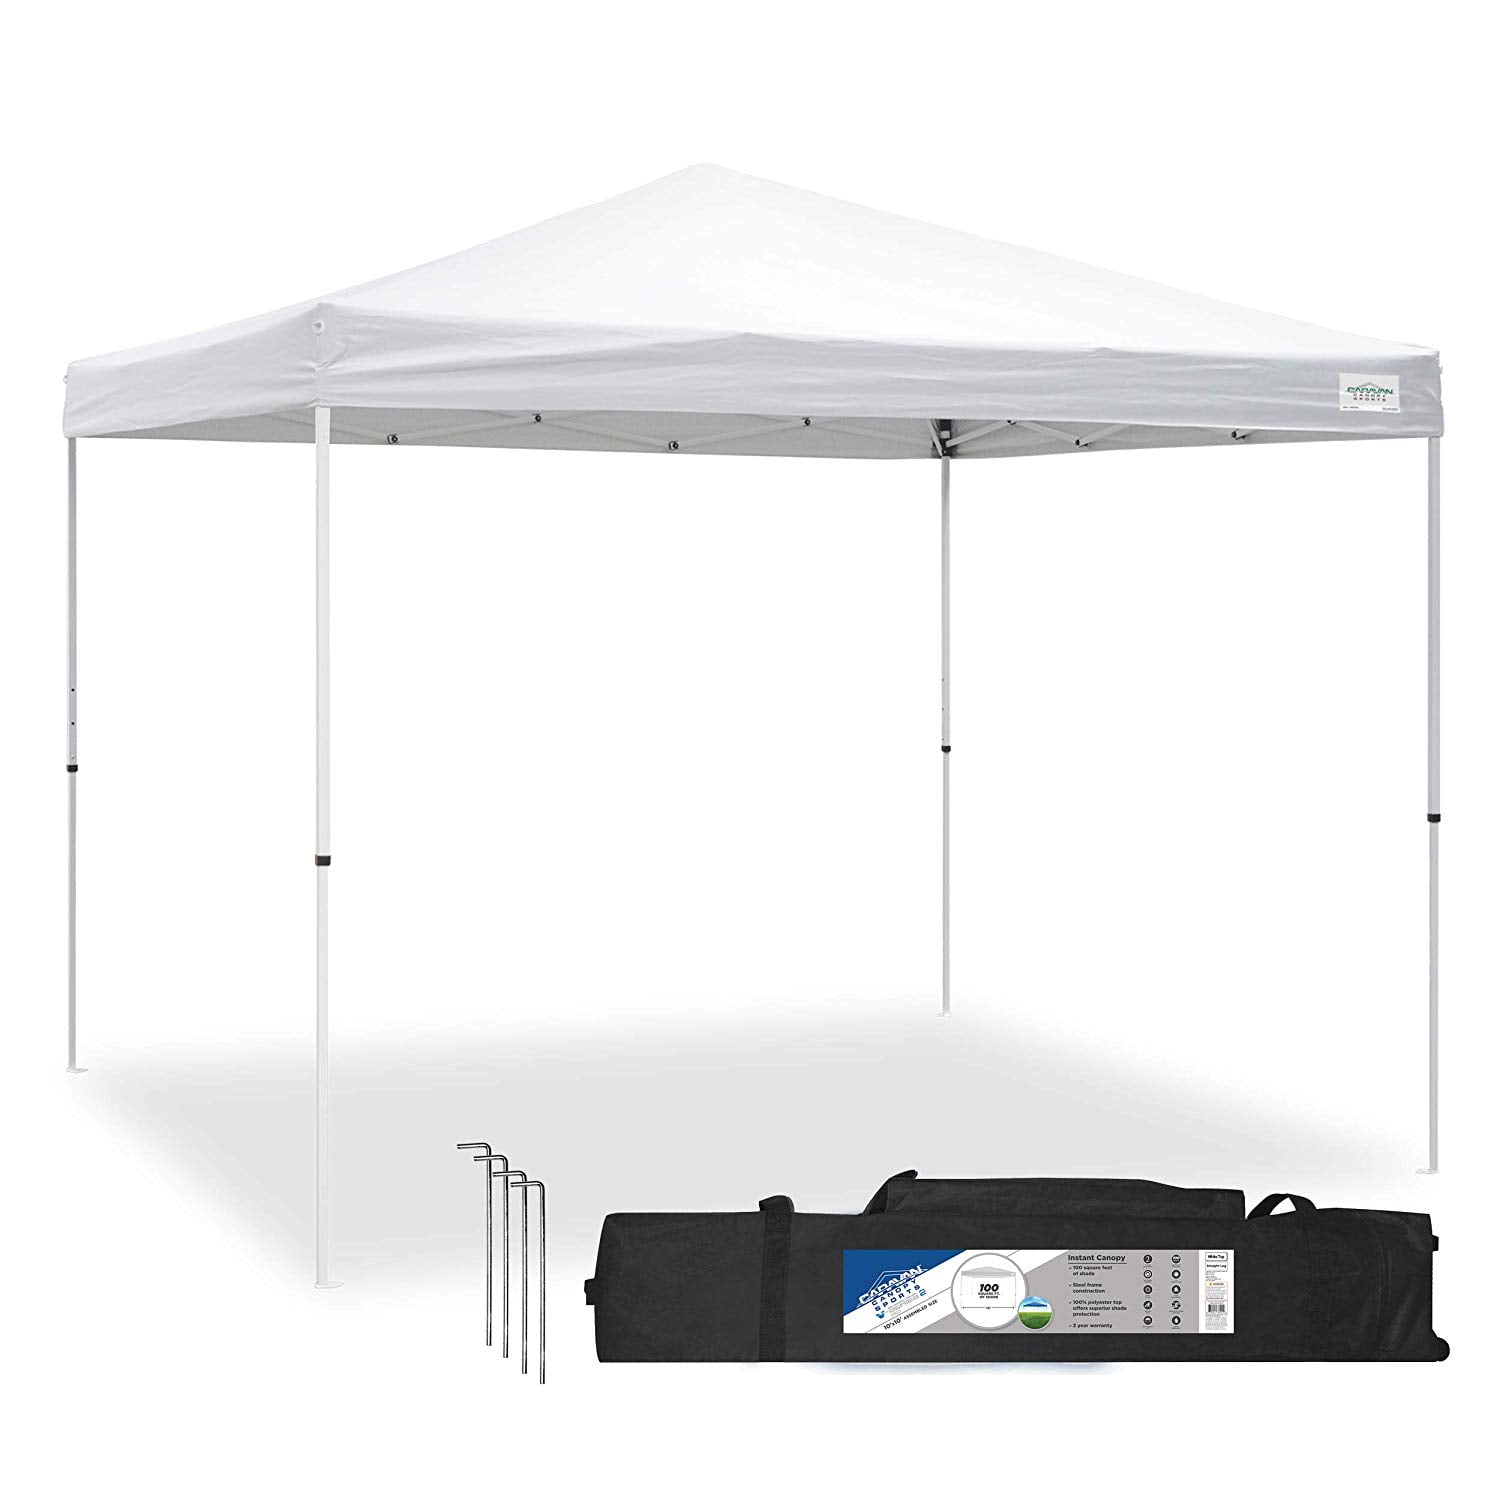 Details about   Caravan Canopy 12x12' Portable Shelter Steel Enclosure Side Wall Instant Garage 